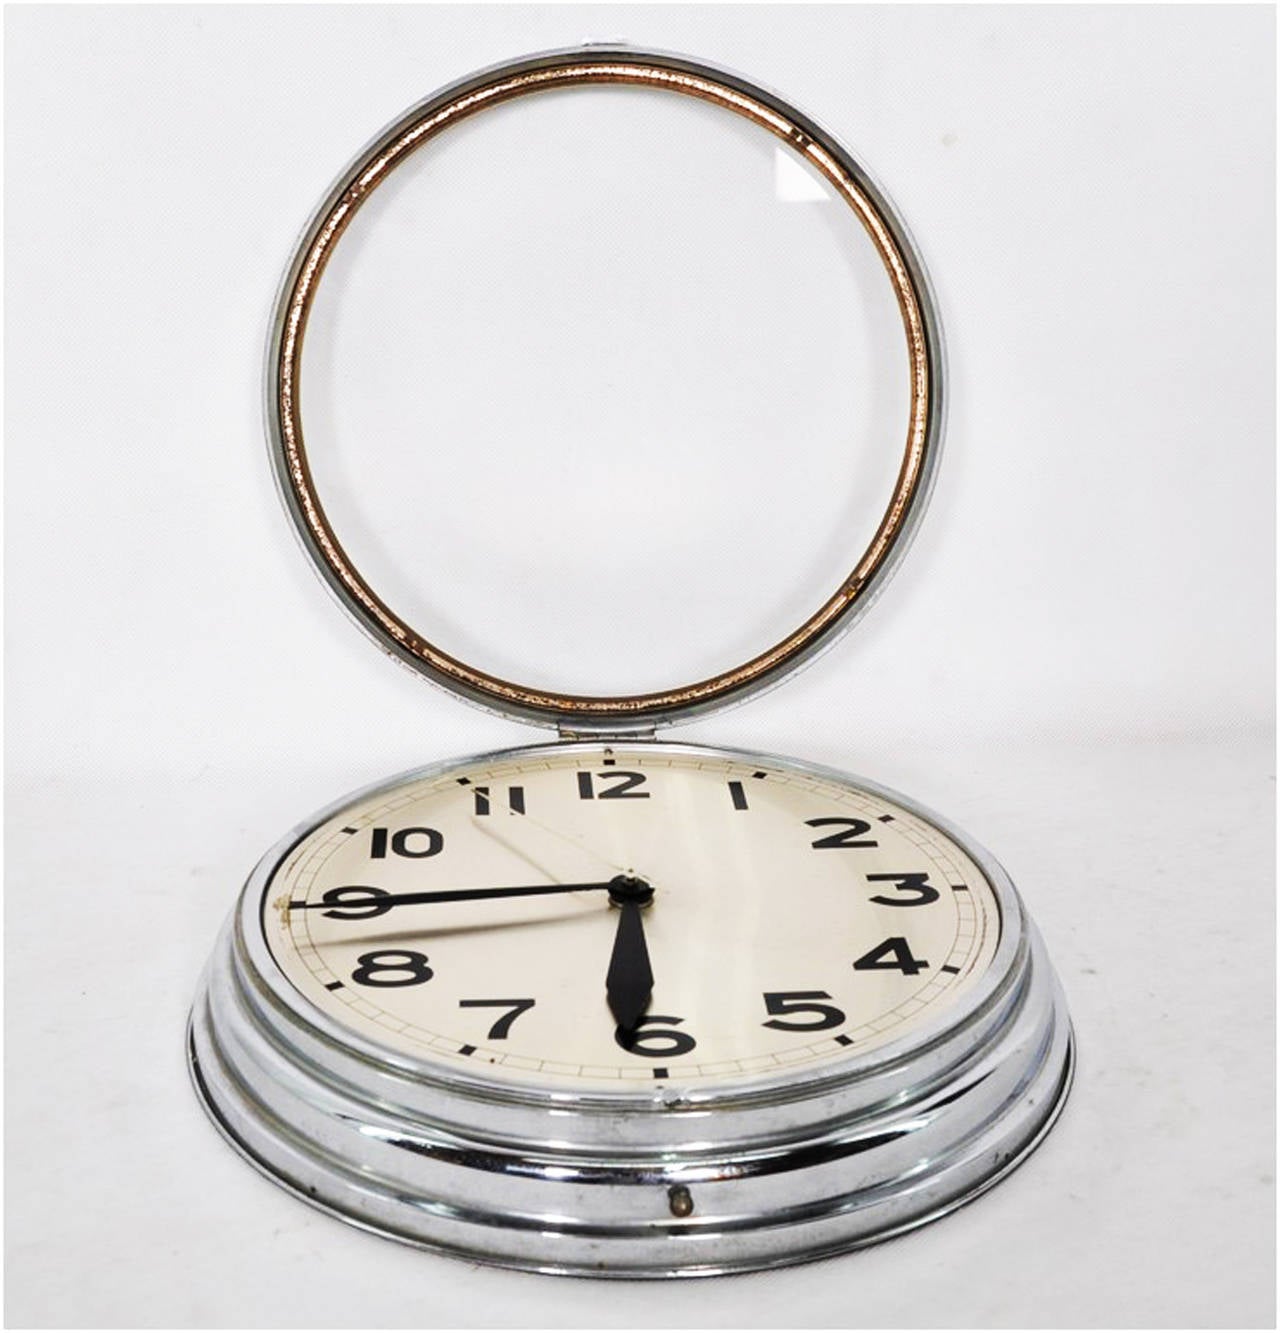 The clock is in perfect condition, no major scratches, no glass scratched.
painted black aluminum original hands.
Formerly a slave clock, it is now fitted with a modern quartz movement with a battery.